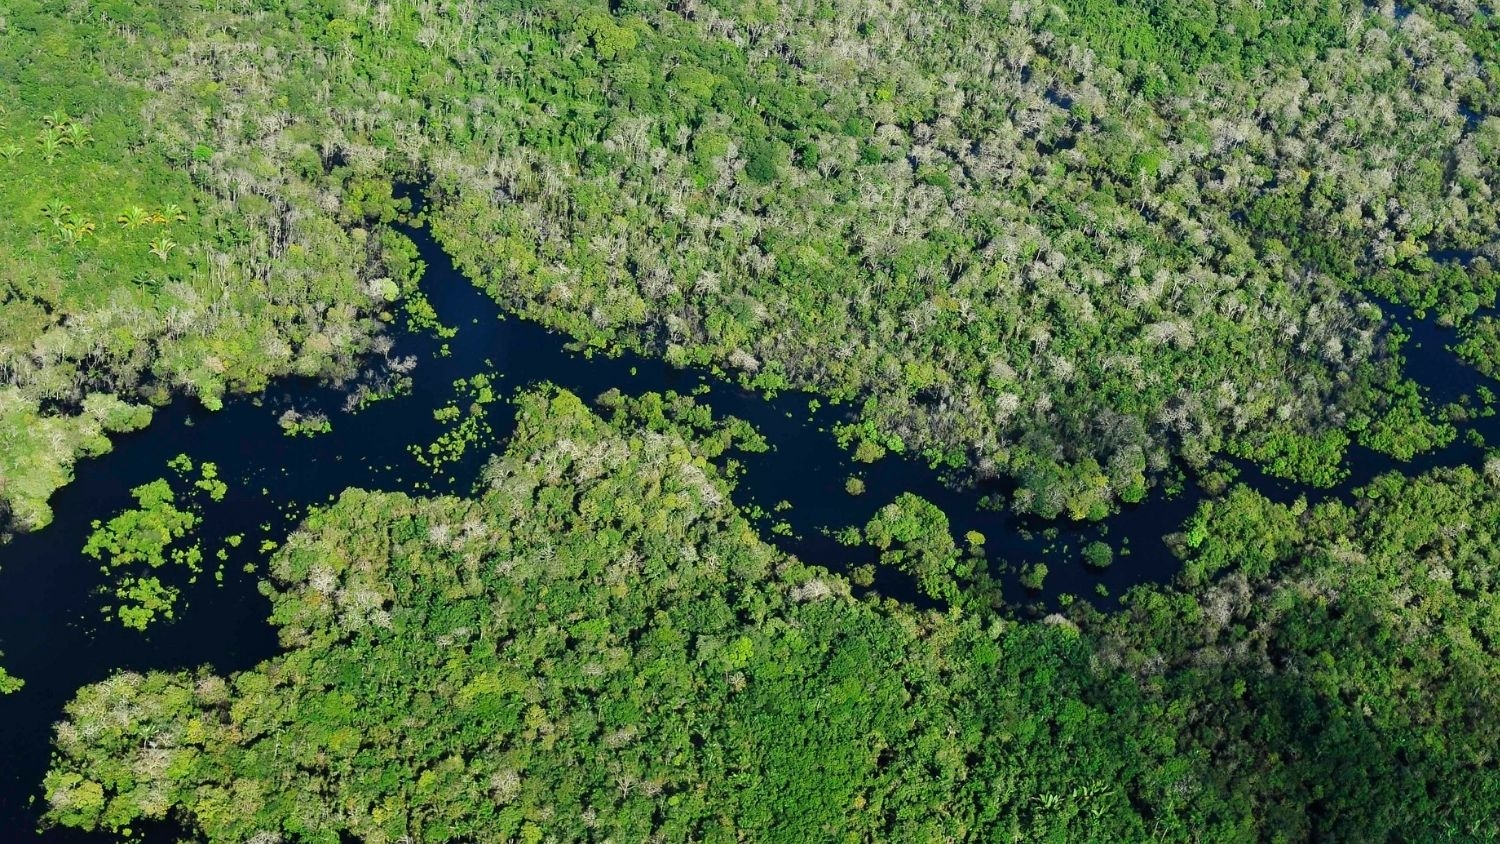 Amazon rainforest aerial view - Impact of Effort to Reduce Amazon Deforestation Overestimated, Study Finds - Forestry and Environmental Resources NC State University